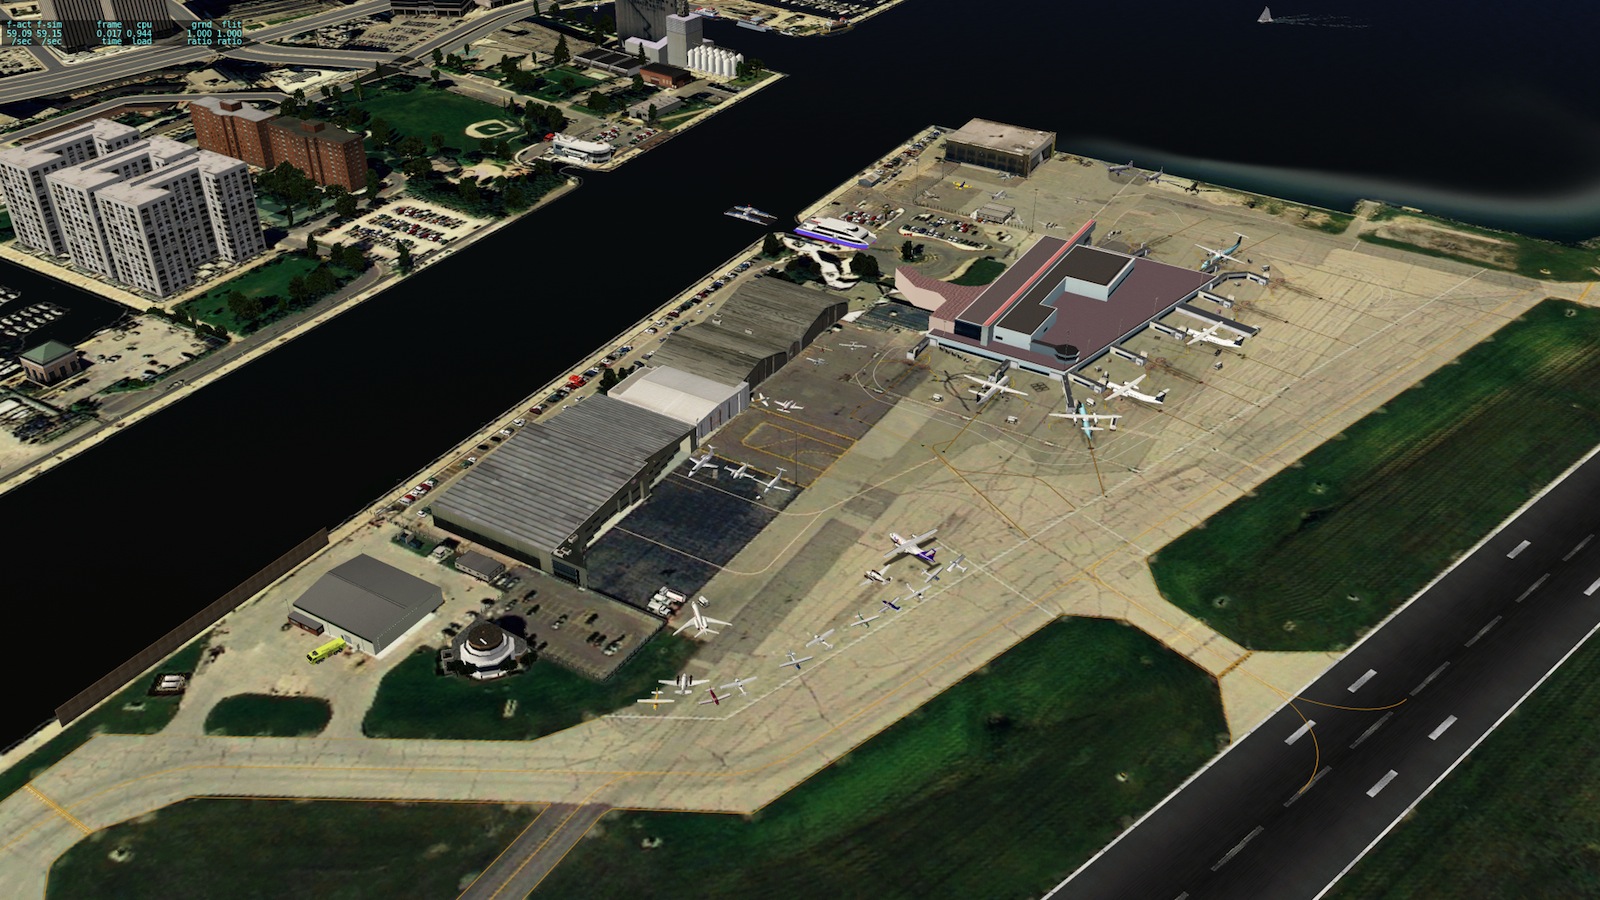 More information about "CYTZ Toronto Island Airport"